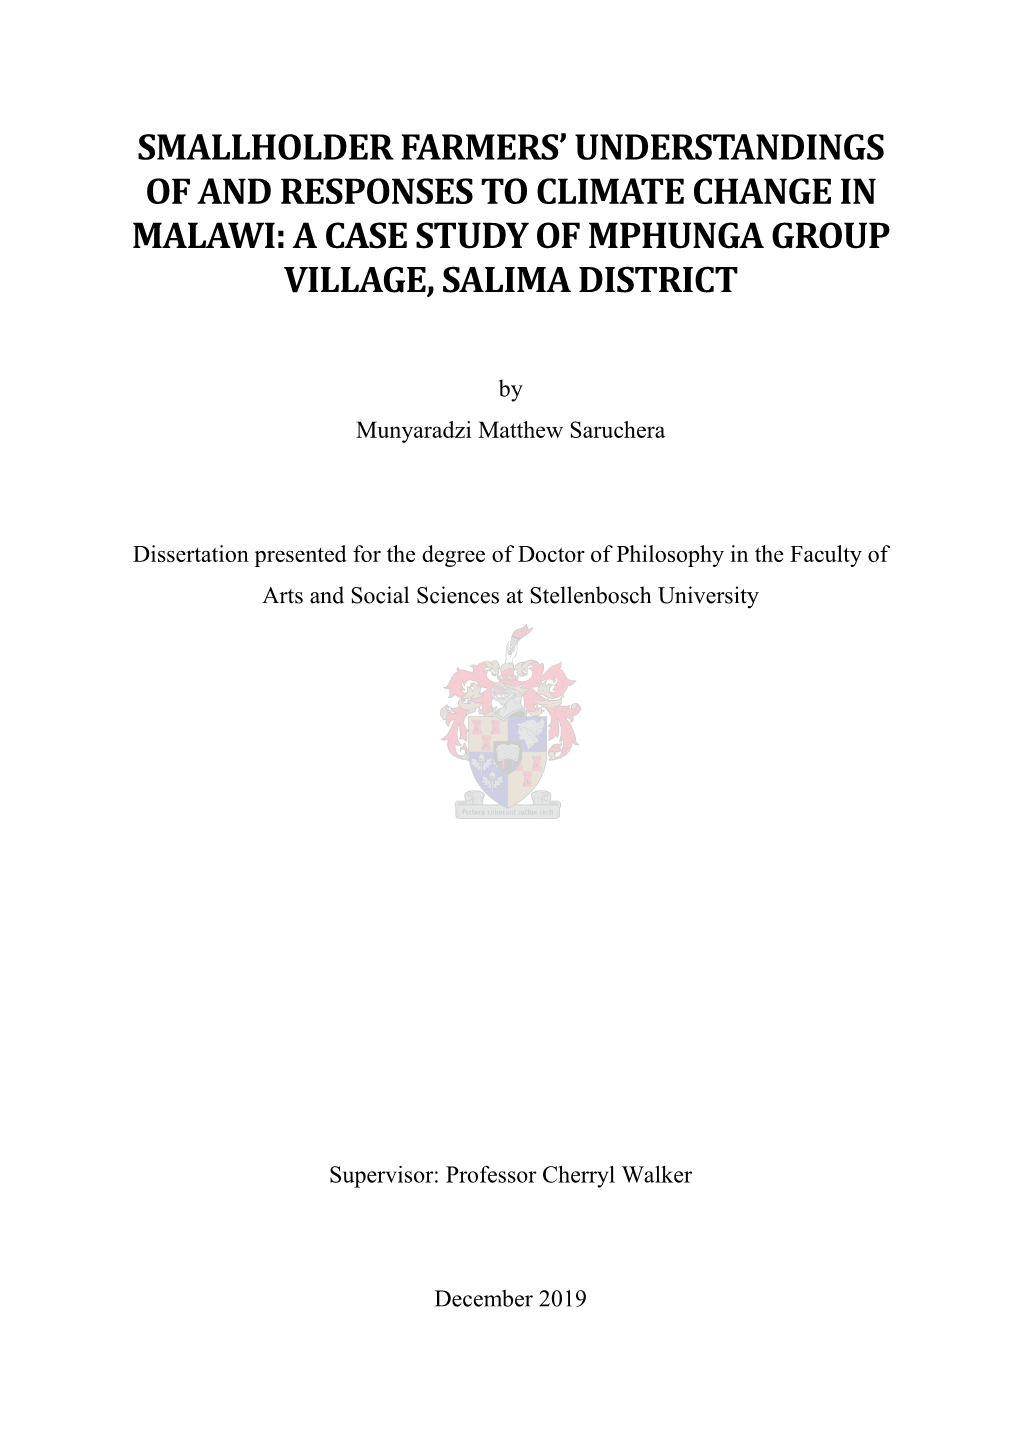 Smallholder Farmers' Understandings of and Responses to Climate Change in Malawi: a Case Study of Mphunga Group Village, Salim